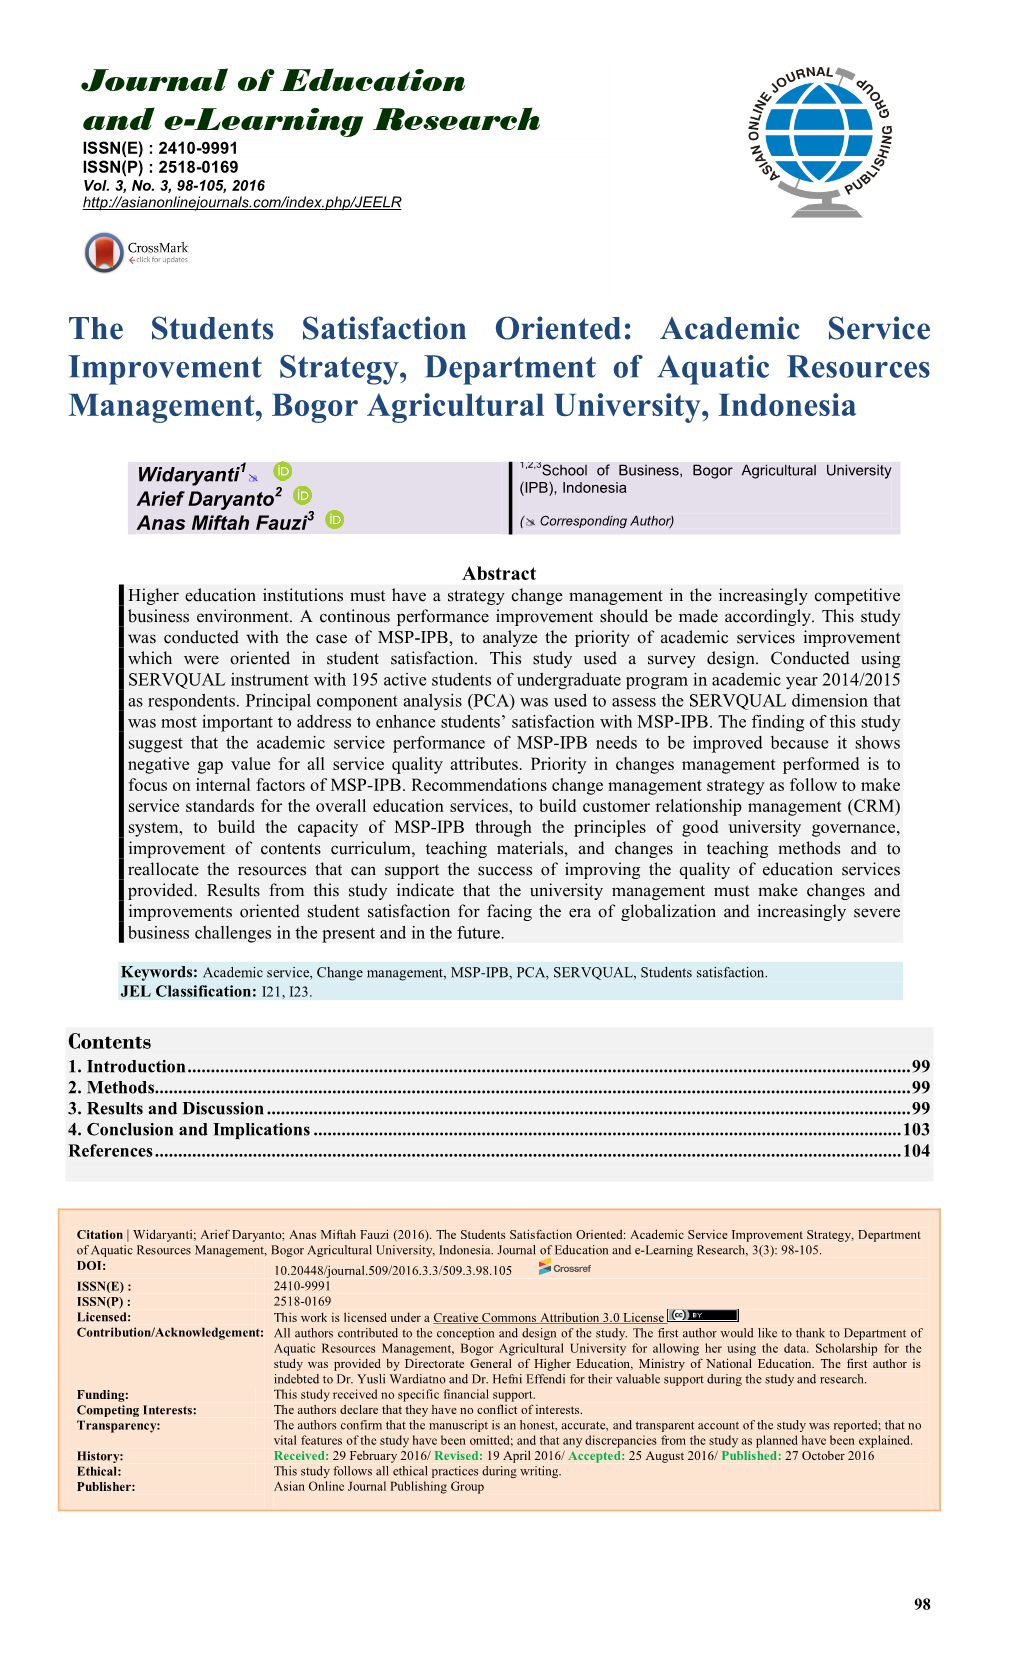 The Students Satisfaction Oriented: Academic Service Improvement Strategy, Department of Aquatic Resources Management, Bogor Agricultural University, Indonesia